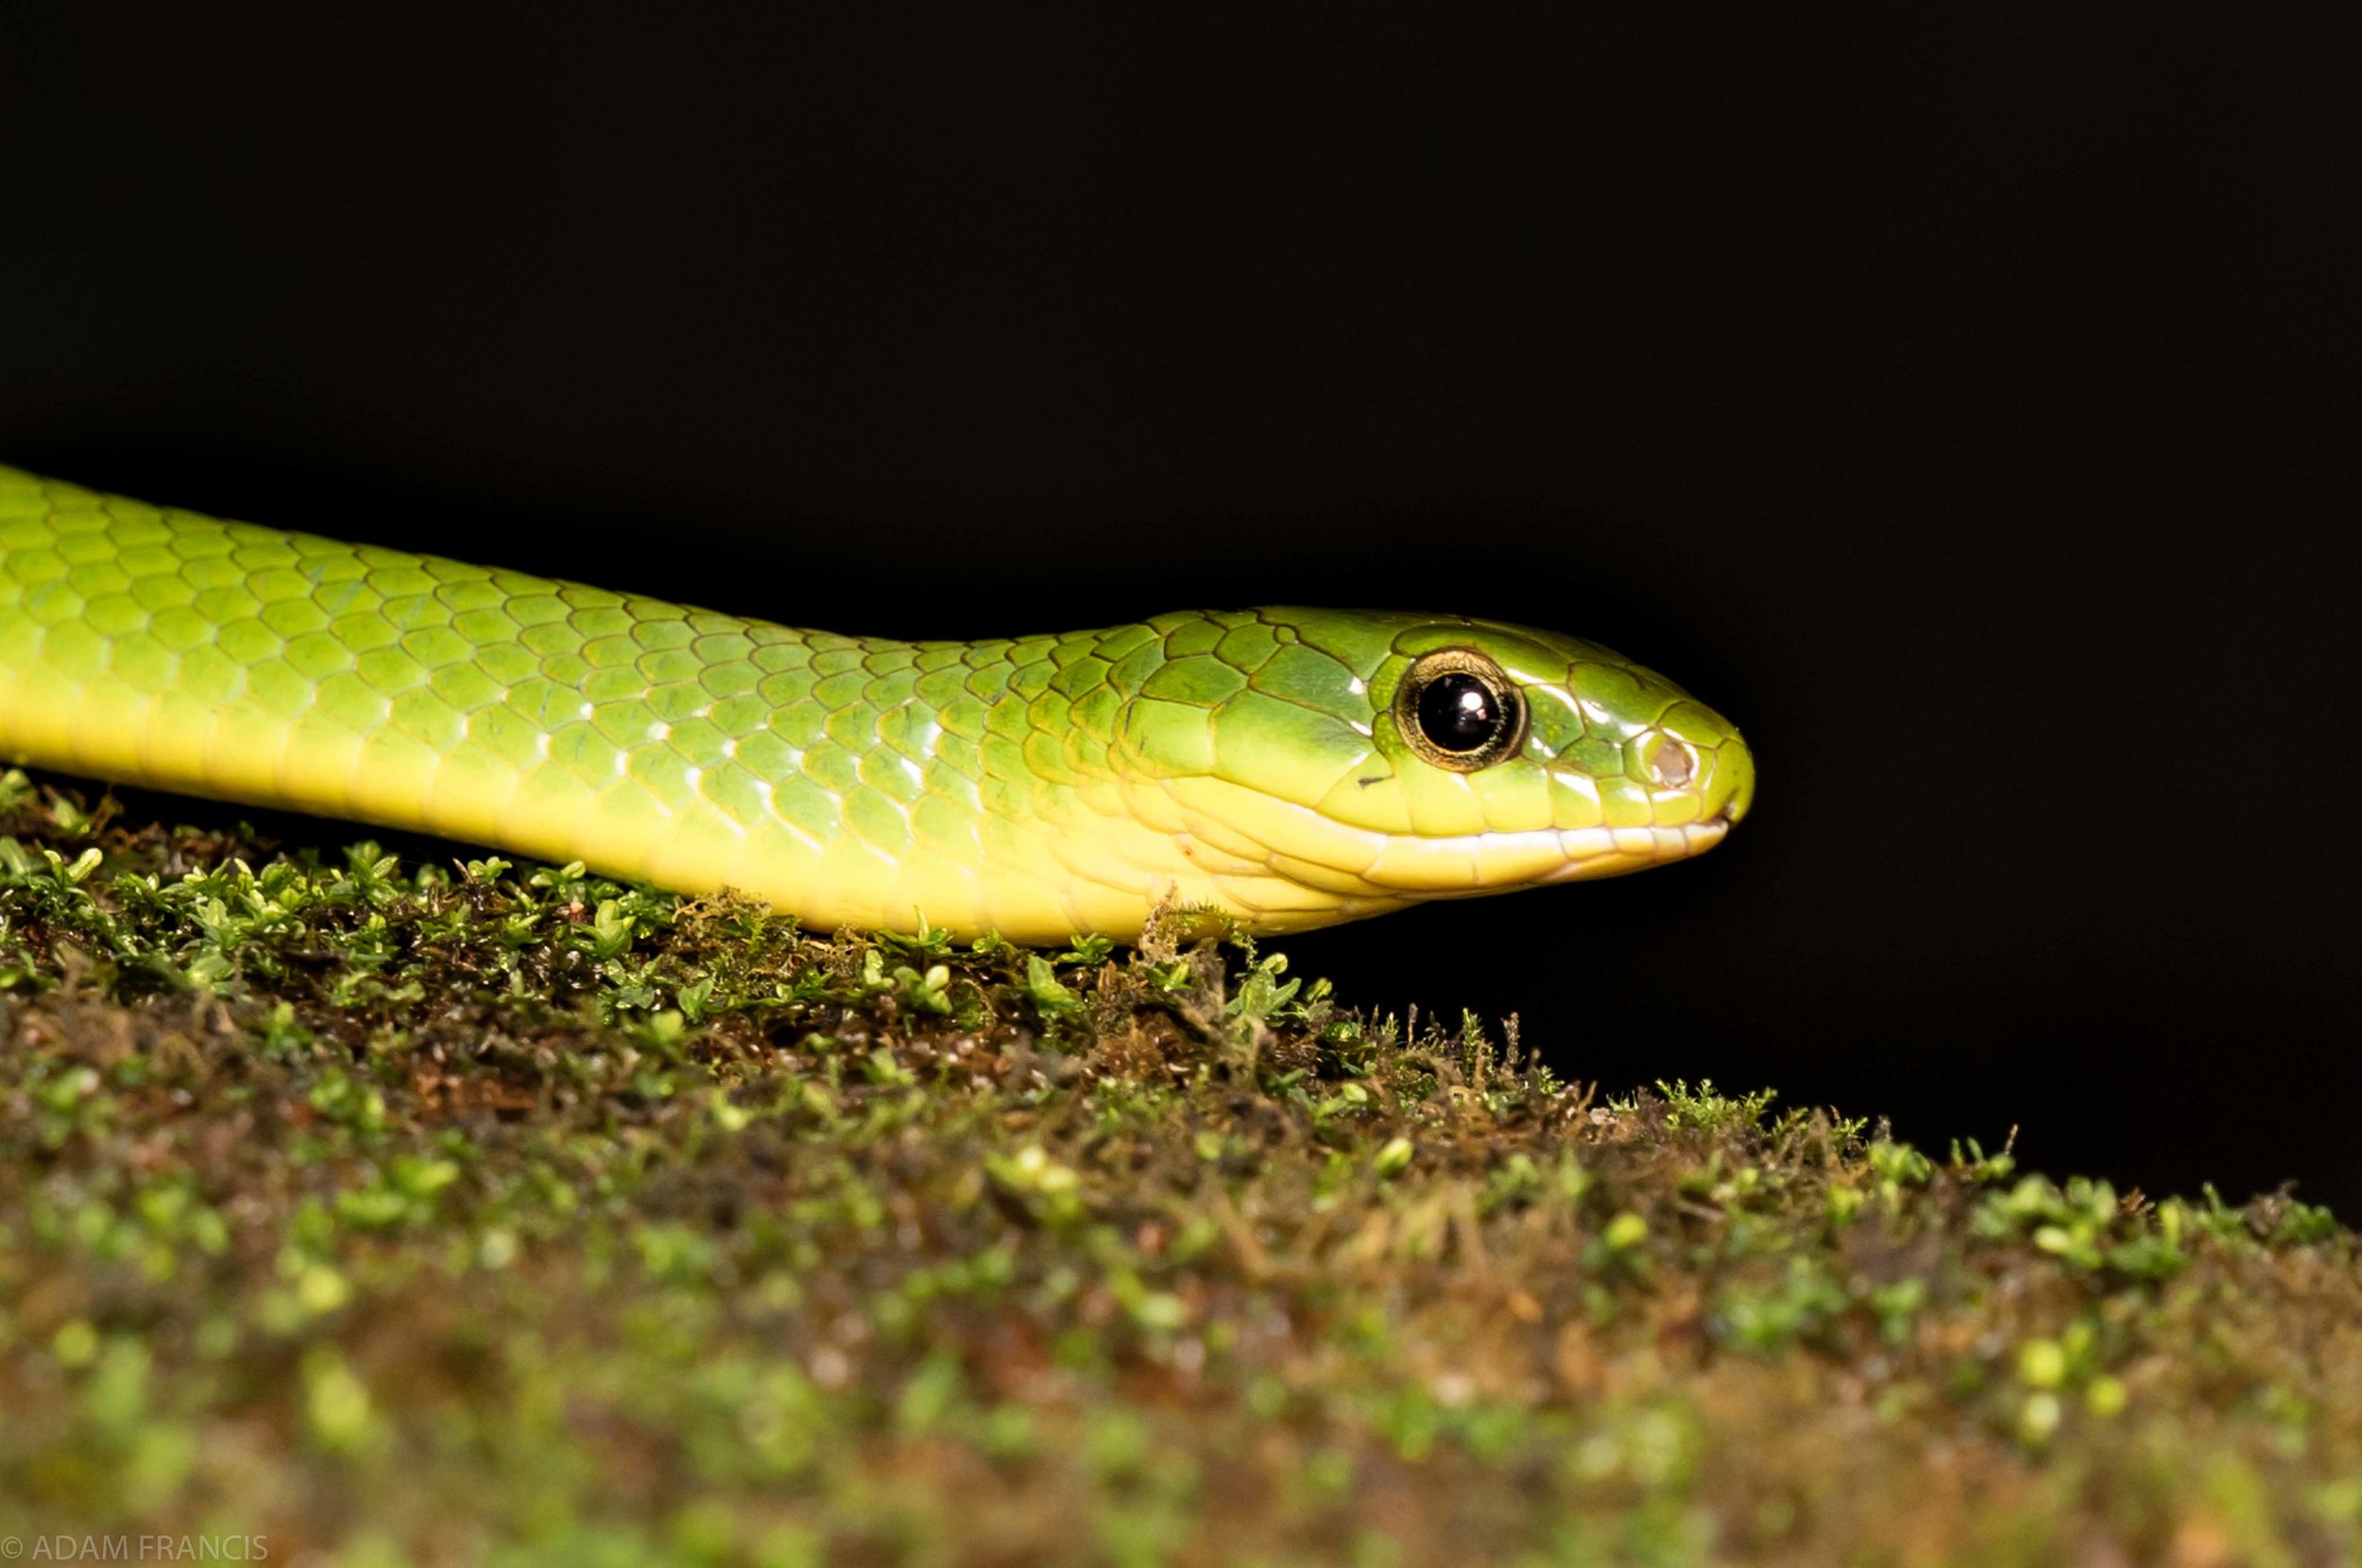 Greater Green Snake - Cyclophiops major